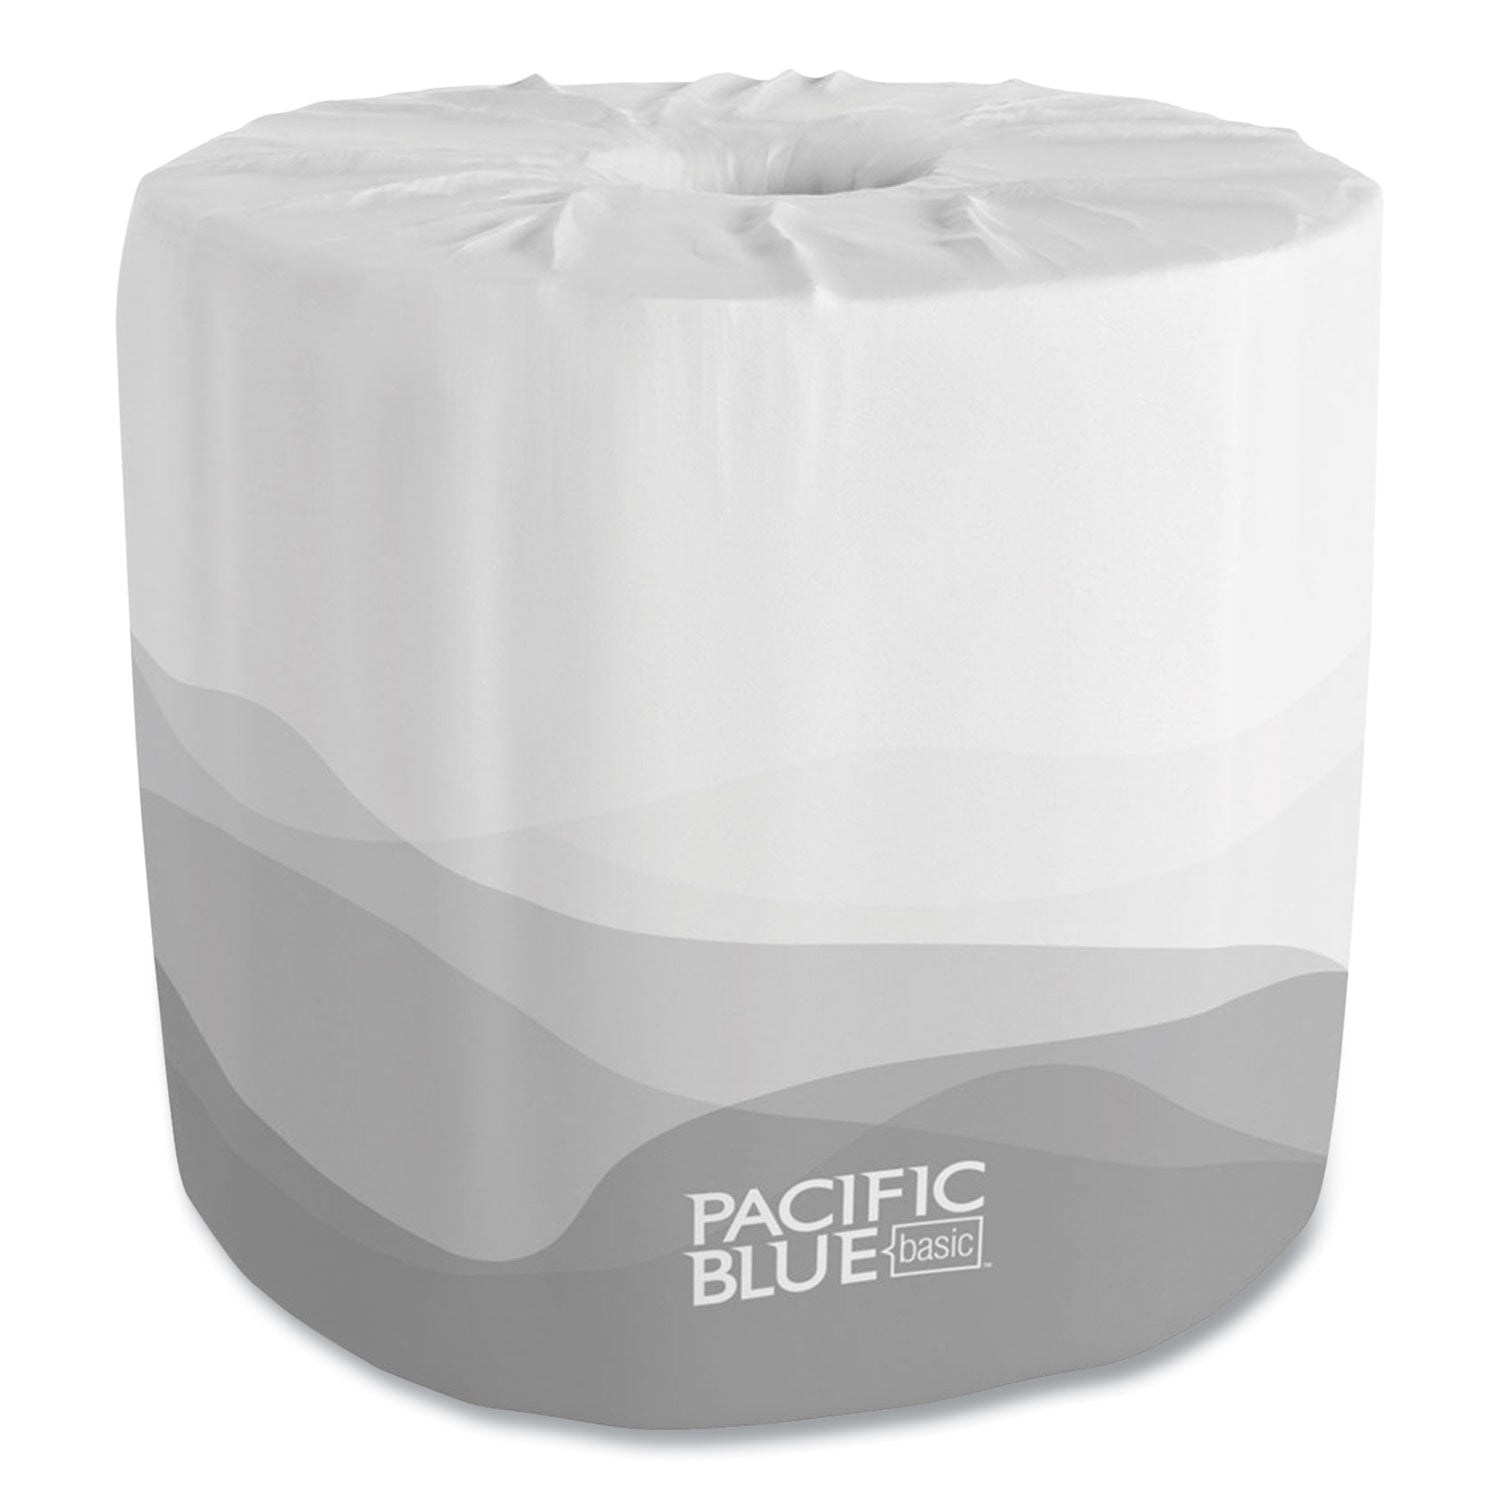 Pacific Blue Basic Bathroom Tissue, Septic Safe, 2-Ply, White, 550 Sheets/Roll, 80 Rolls/Carton - 